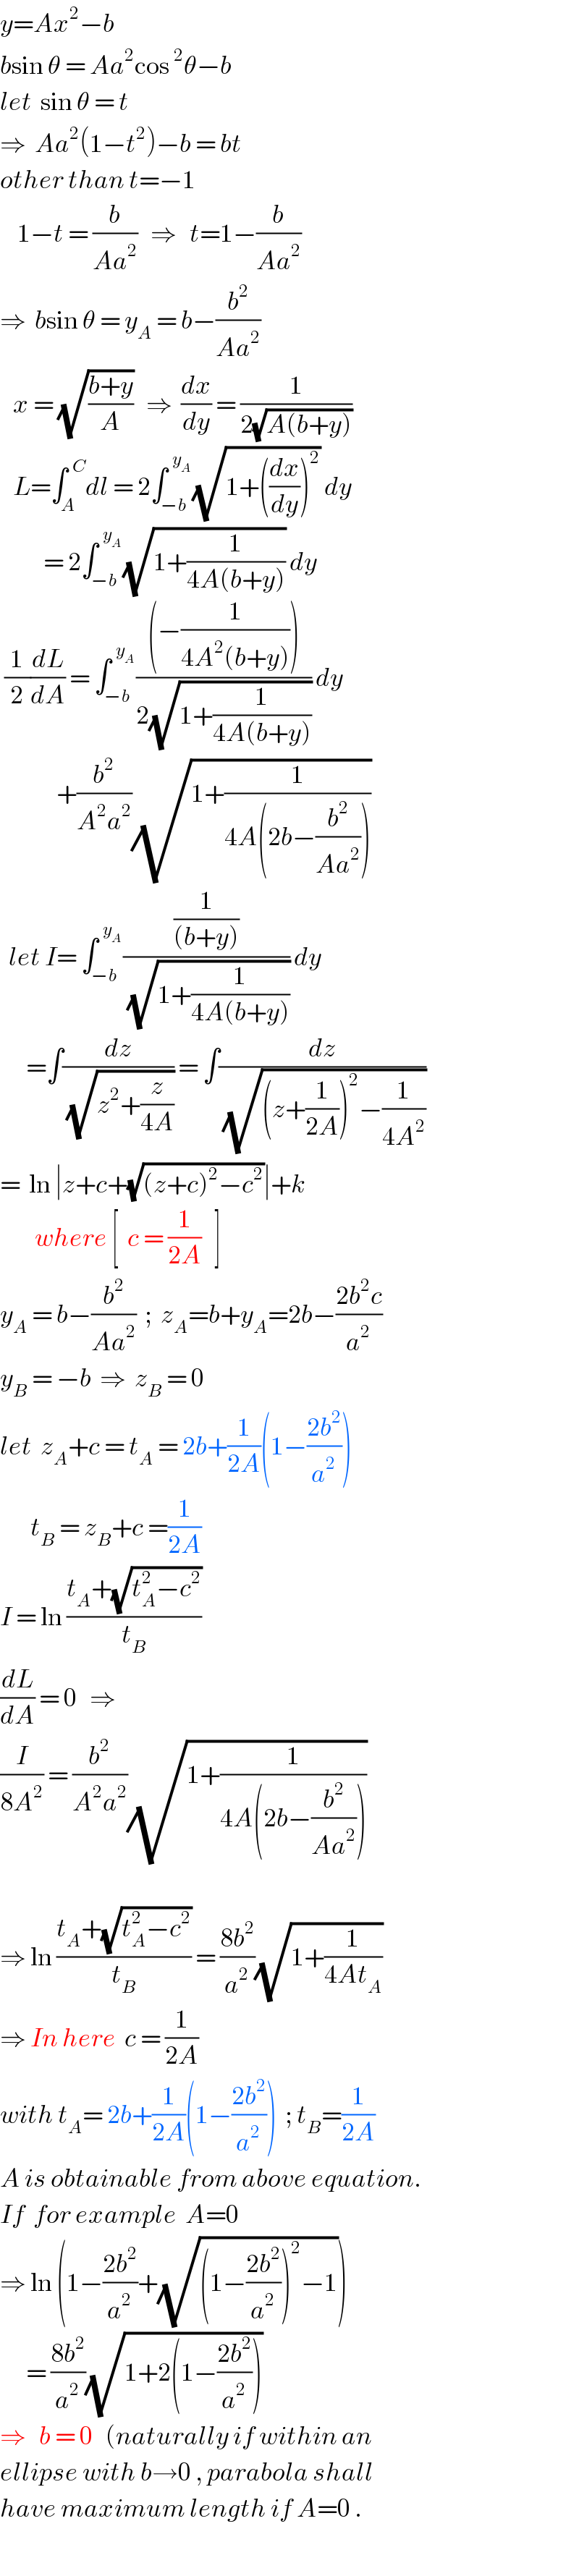 y=Ax^2 −b  bsin θ = Aa^2 cos^2 θ−b  let  sin θ = t  ⇒  Aa^2 (1−t^2 )−b = bt  other than t=−1      1−t = (b/(Aa^2 ))   ⇒   t=1−(b/(Aa^2 ))  ⇒  bsin θ = y_A  = b−(b^2 /(Aa^2 ))     x = (√((b+y)/A))   ⇒  (dx/dy) = (1/(2(√(A(b+y)))))     L=∫_A ^(  C) dl = 2∫_(−b) ^(  y_A ) (√(1+((dx/dy))^2 )) dy            = 2∫_(−b) ^(  y_A ) (√(1+(1/(4A(b+y))))) dy   (1/2)(dL/dA) = ∫_(−b) ^(  y_A ) (((−(1/(4A^2 (b+y)))))/(2(√(1+(1/(4A(b+y))))))) dy               +(b^2 /(A^2 a^2 ))(√(1+(1/(4A(2b−(b^2 /(Aa^2 )))))))    let I= ∫_(−b) ^(  y_A ) ((1/((b+y)))/(√(1+(1/(4A(b+y)))))) dy        =∫(dz/(√(z^2 +(z/(4A))))) = ∫(dz/(√((z+(1/(2A)))^2 −(1/(4A^2 )))))  =  ln ∣z+c+(√((z+c)^2 −c^2 ))∣+k          where [  c = (1/(2A))   ]  y_A  = b−(b^2 /(Aa^2 ))  ;  z_A =b+y_A =2b−((2b^2 c)/a^2 )  y_B  = −b  ⇒  z_B  = 0  let  z_A +c = t_A  = 2b+(1/(2A))(1−((2b^2 )/a^2 ))         t_B  = z_B +c =(1/(2A))  I = ln ((t_A +(√(t_A ^2 −c^2 )))/t_B )  (dL/dA) = 0   ⇒  (I/(8A^2 )) = (b^2 /(A^2 a^2 ))(√(1+(1/(4A(2b−(b^2 /(Aa^2 )))))))        ⇒ ln ((t_A +(√(t_A ^2 −c^2 )))/t_B ) = ((8b^2 )/a^2 )(√(1+(1/(4At_A ))))  ⇒ In here  c = (1/(2A))  with t_A = 2b+(1/(2A))(1−((2b^2 )/a^2 ))  ; t_B =(1/(2A))  A is obtainable from above equation.  If  for example  A=0  ⇒ ln (1−((2b^2 )/a^2 )+(√((1−((2b^2 )/a^2 ))^2 −1)))        = ((8b^2 )/a^2 )(√(1+2(1−((2b^2 )/a^2 ))))  ⇒   b = 0   (naturally if within an  ellipse with b→0 , parabola shall  have maximum length if A=0 .  